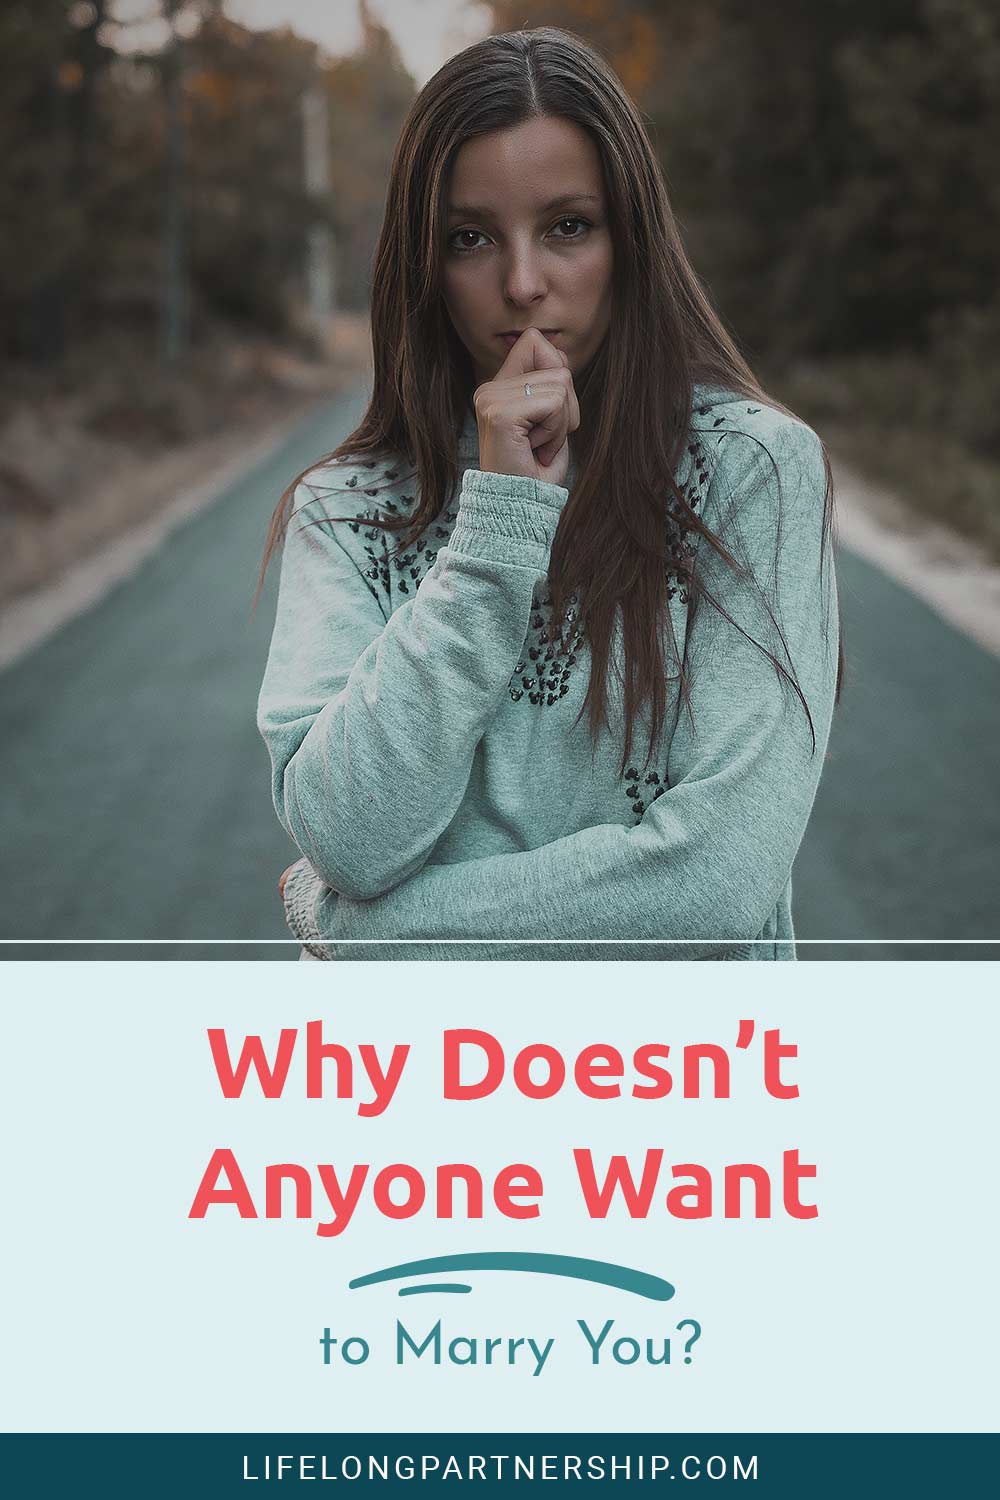 Why Doesn’t Anyone Want to Marry You?